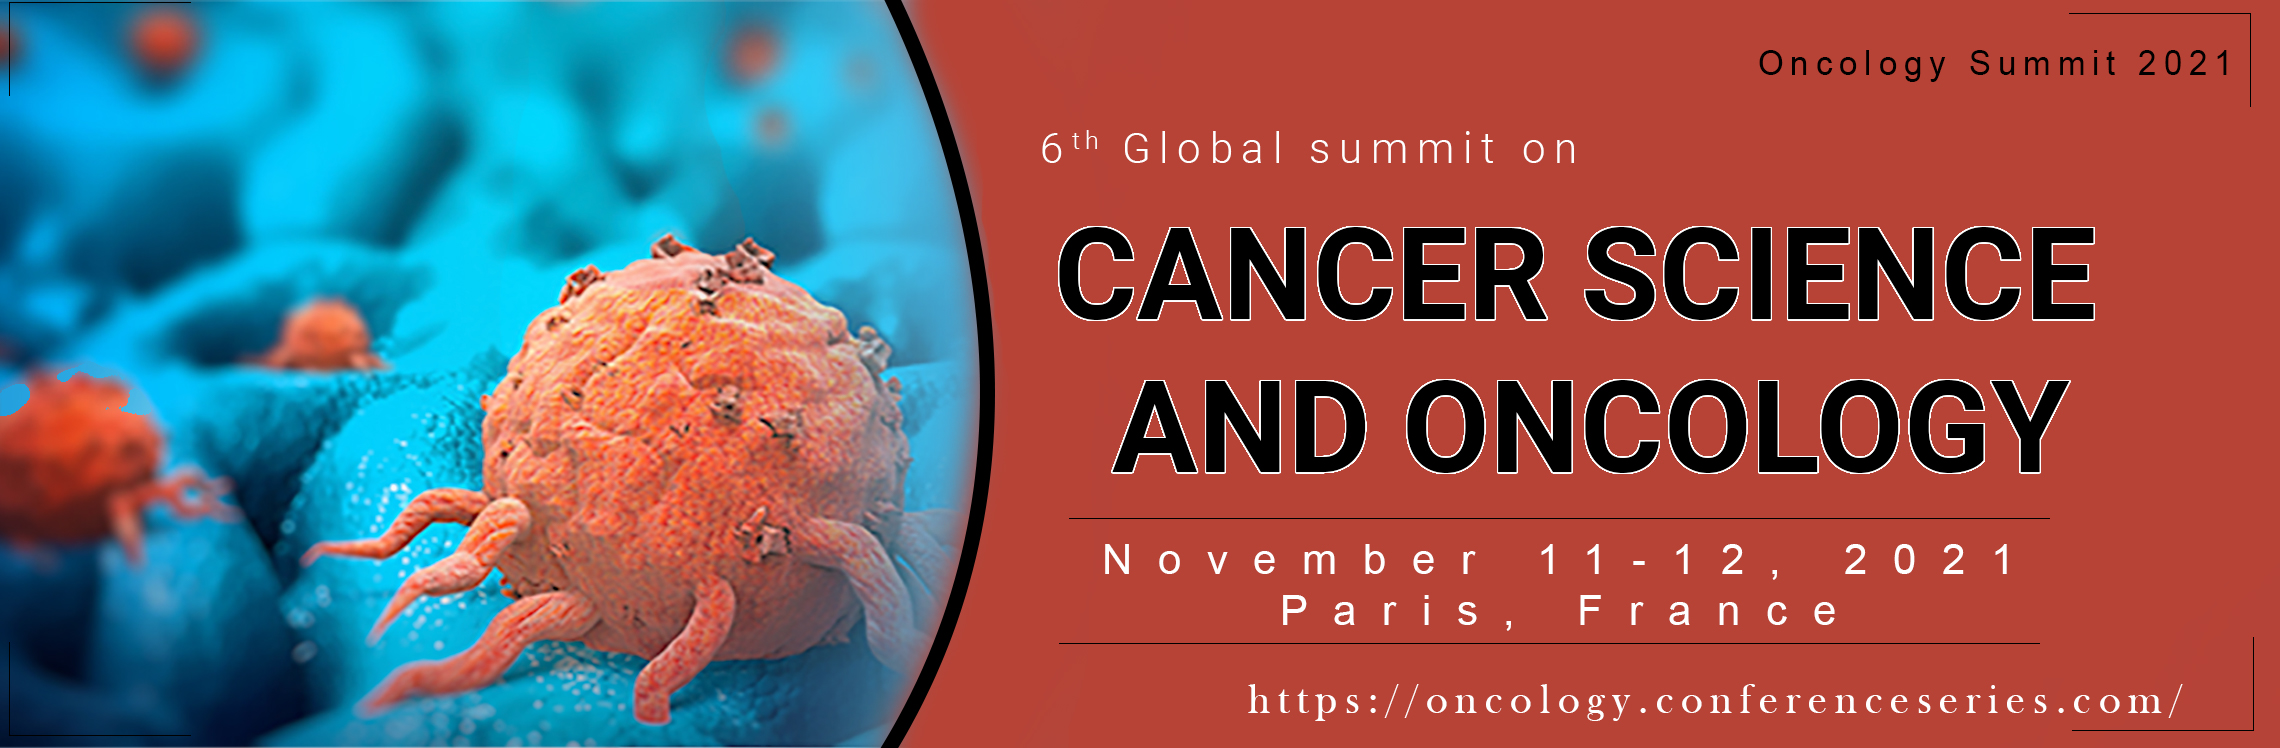 Cancer Conference Oncology Summit Medical Meetings Radiology